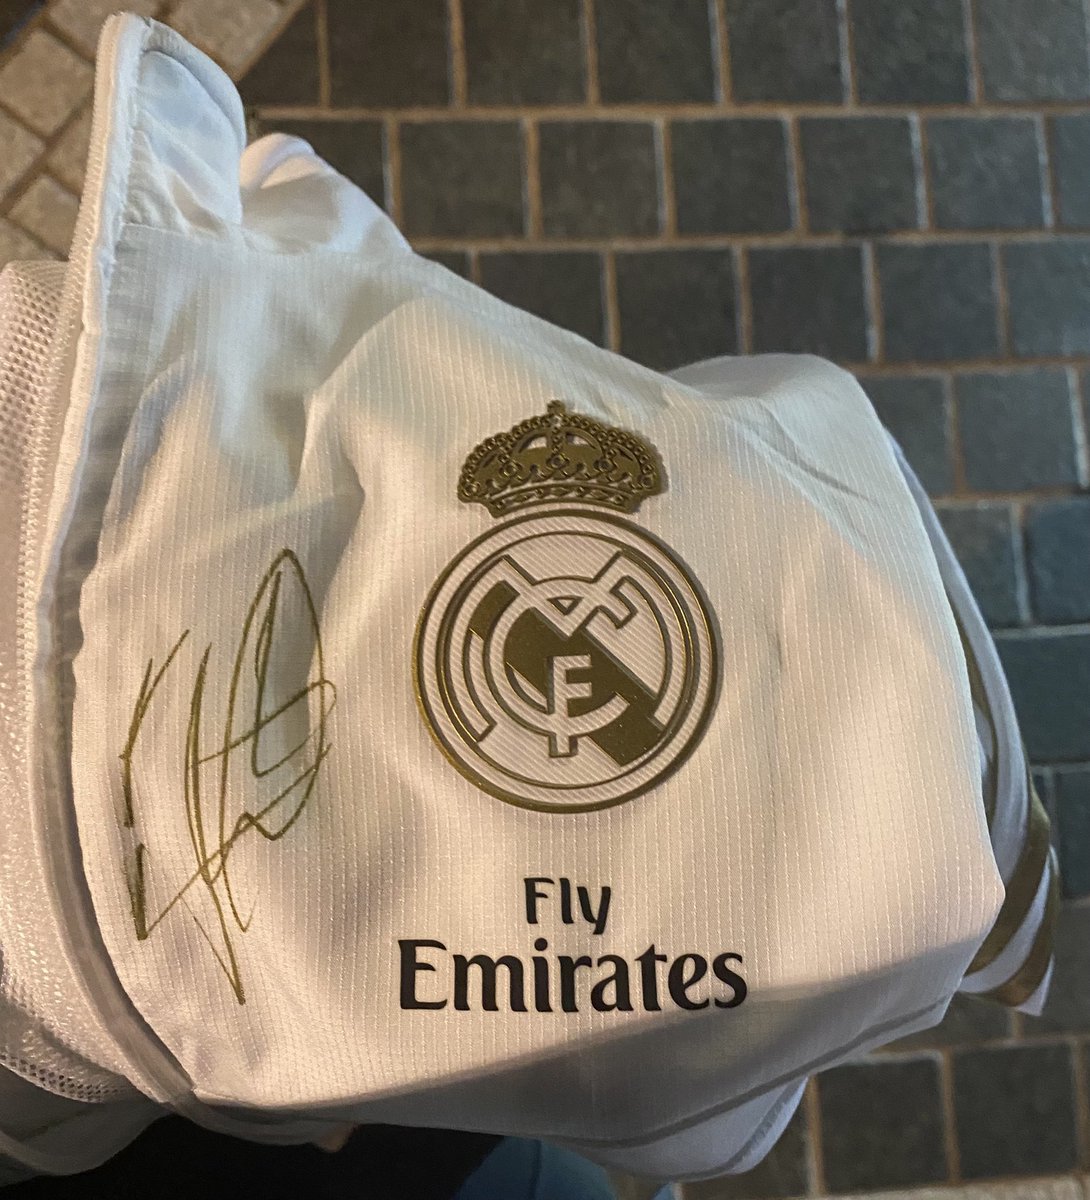 🚨| Kylian Mbappé signed a fan's Real Madrid jersey at the #GlobeSoccerAwards gala in Dubai. #rmalive